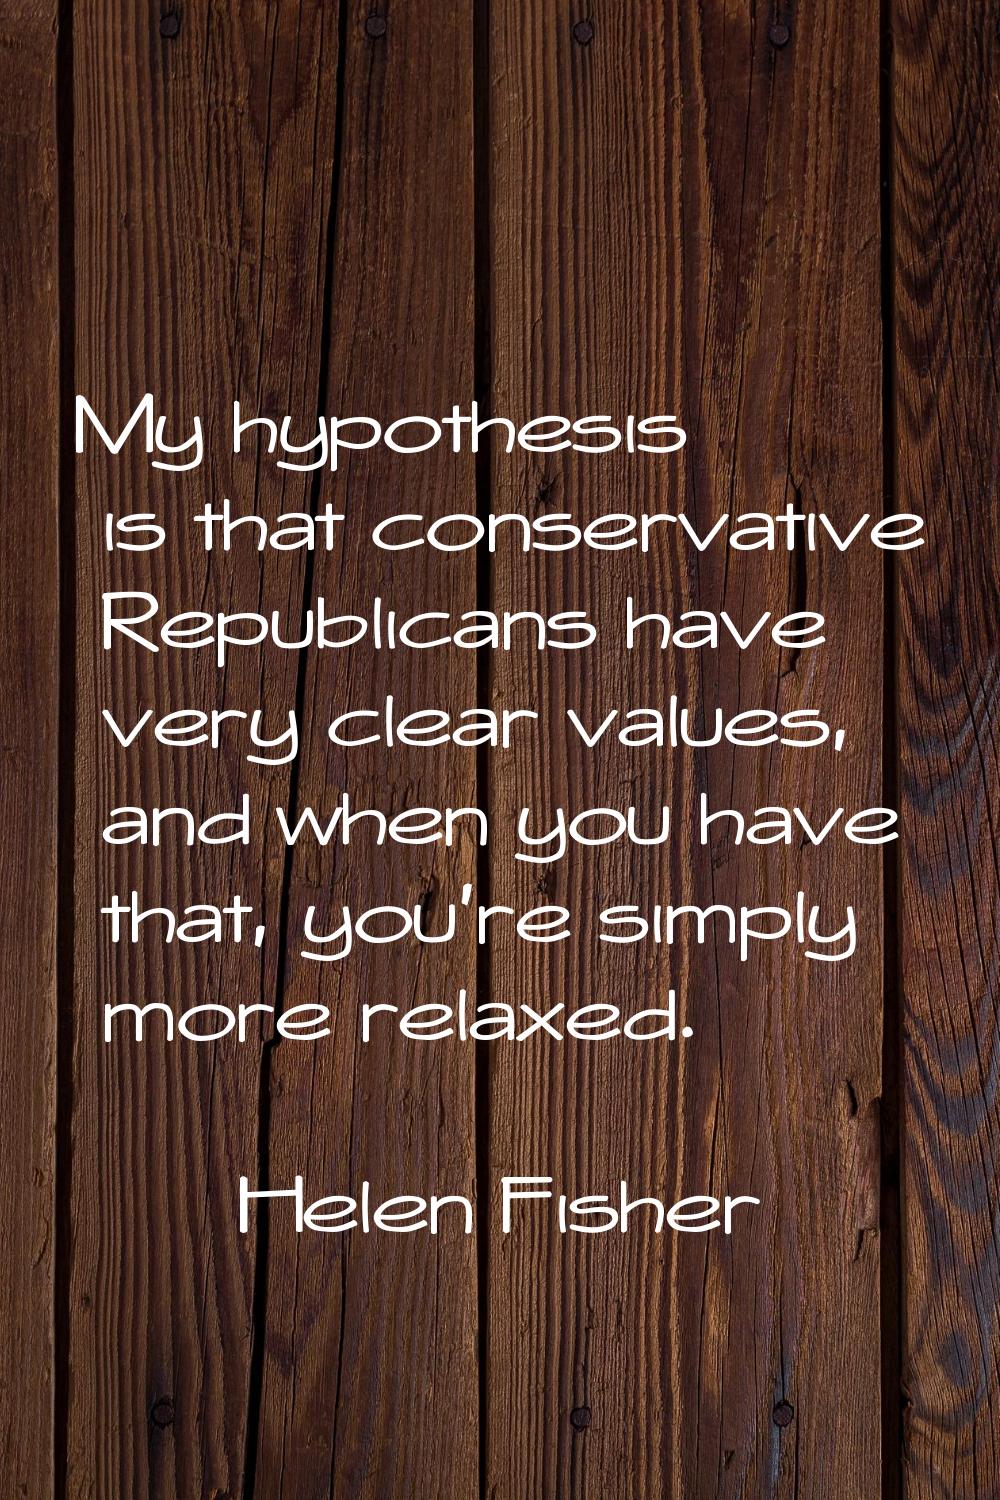 My hypothesis is that conservative Republicans have very clear values, and when you have that, you'